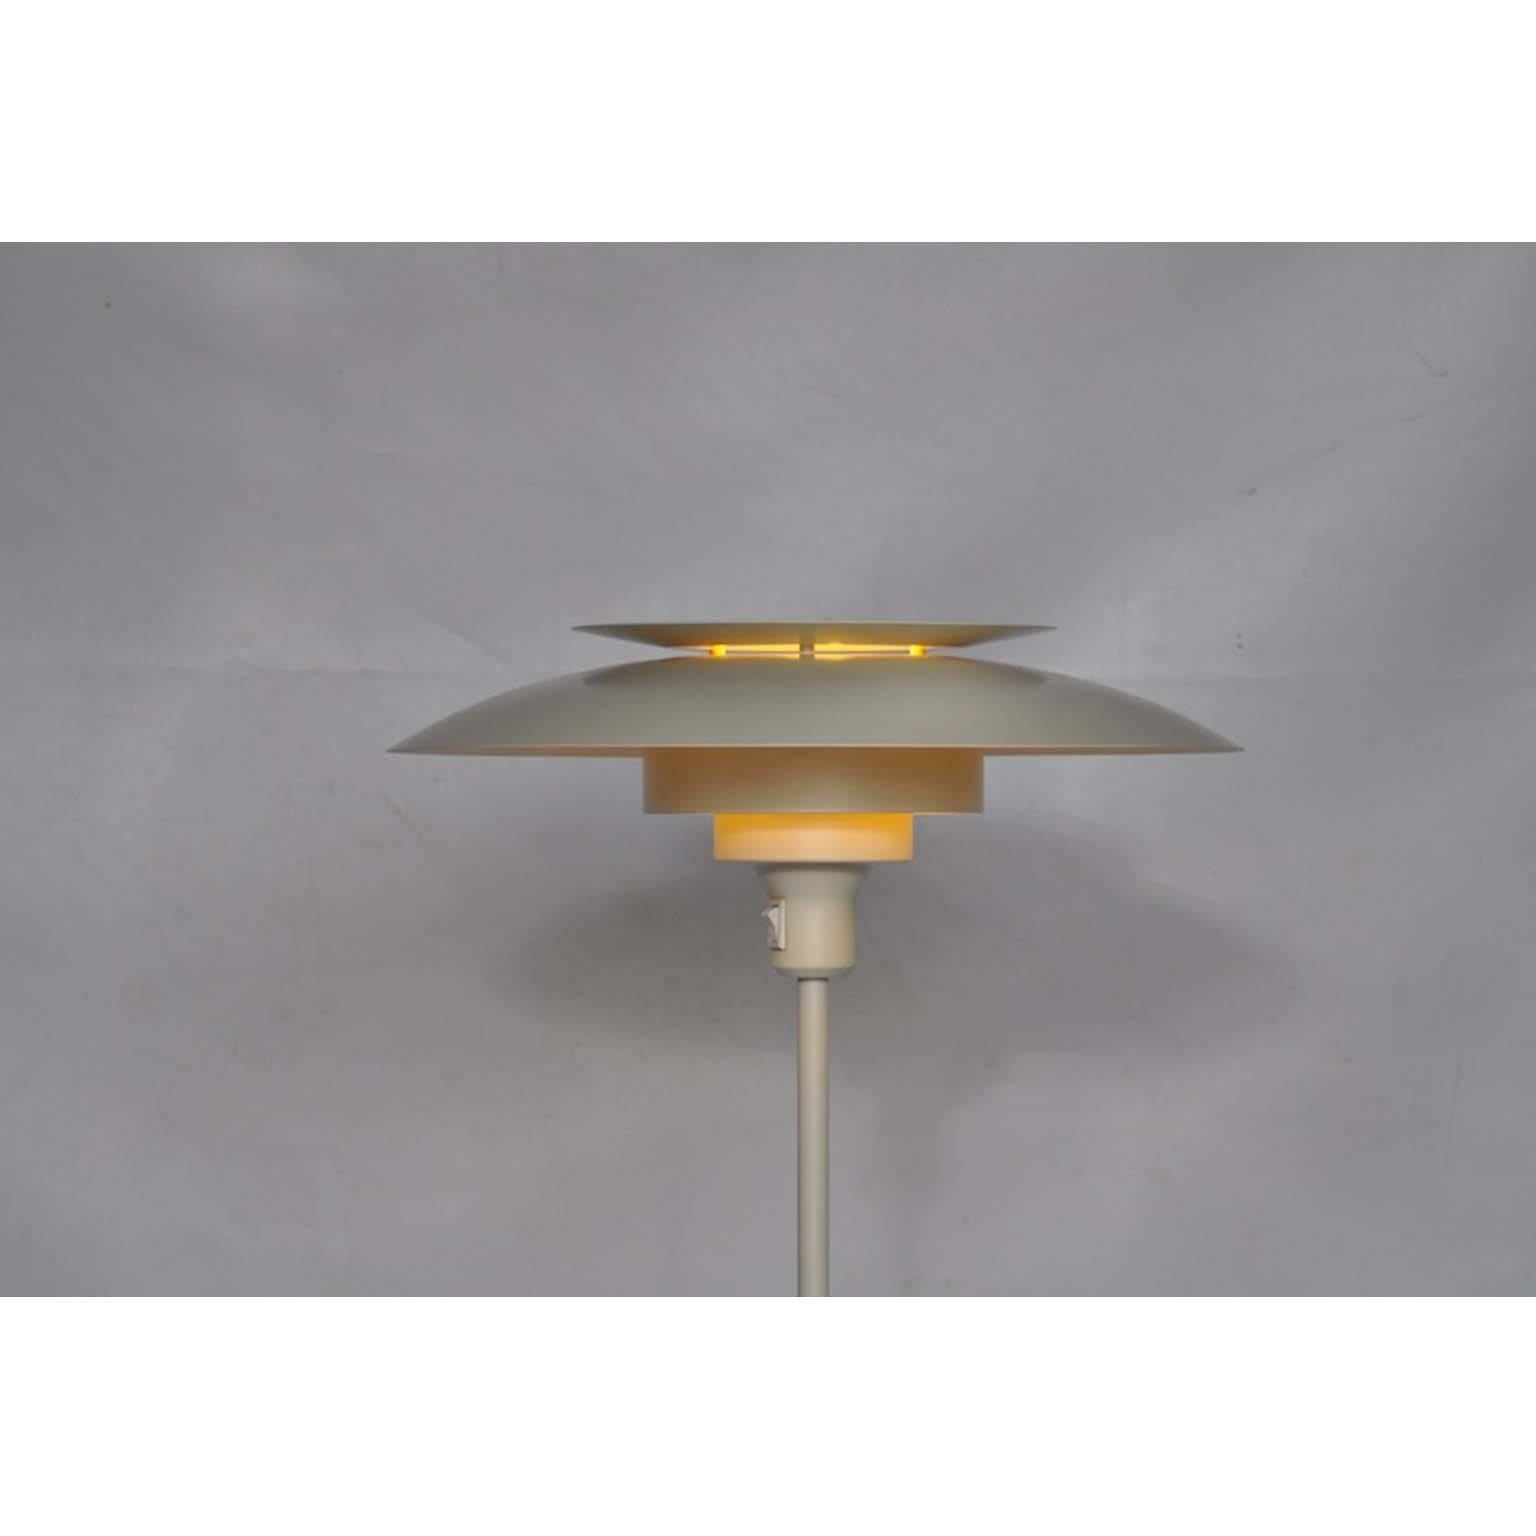 White metal Danish floor lamp by the son of the famous Poul Henningsen, Simon Henningsen for Lyskaer. Marked under the lamp shade.

All our lights are checked and tested. Because of the lower voltage standard in the USA (110v vs 220v), European